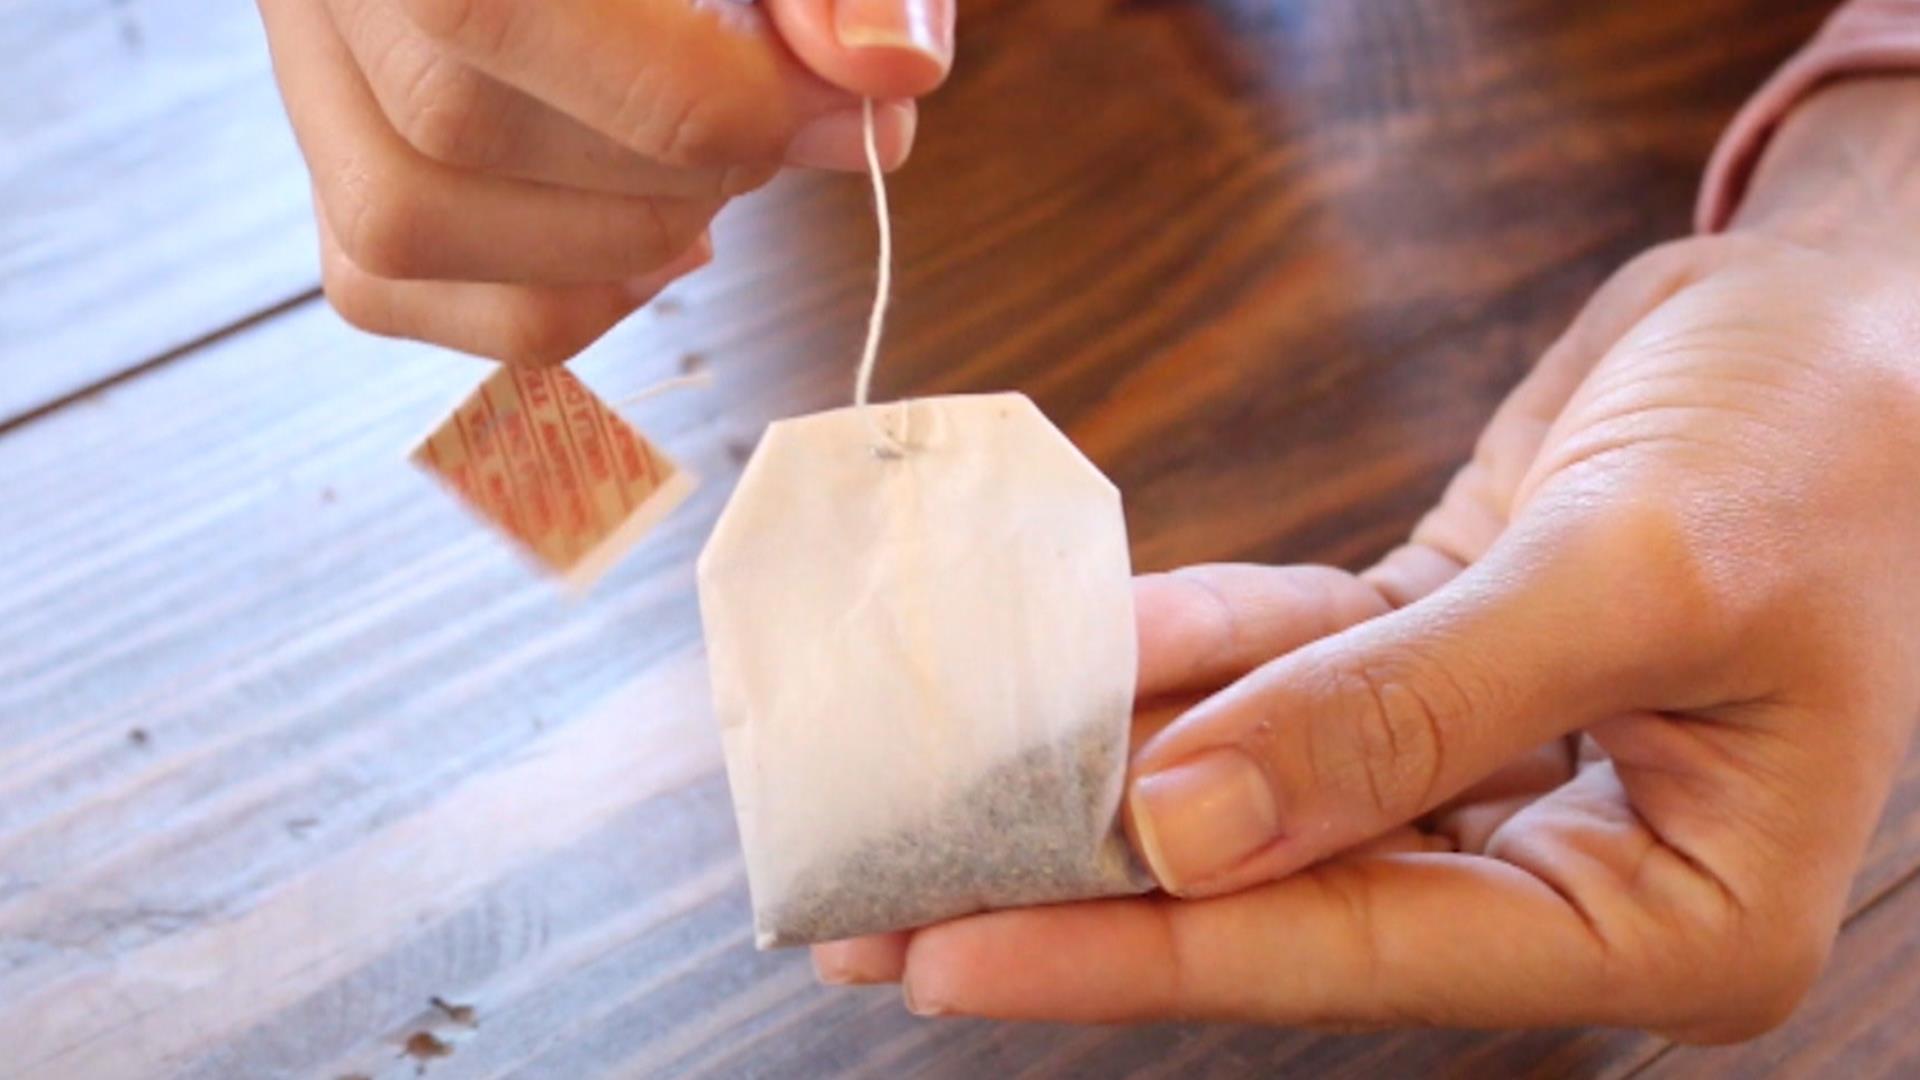 How to fix a broken nail with a tea bag